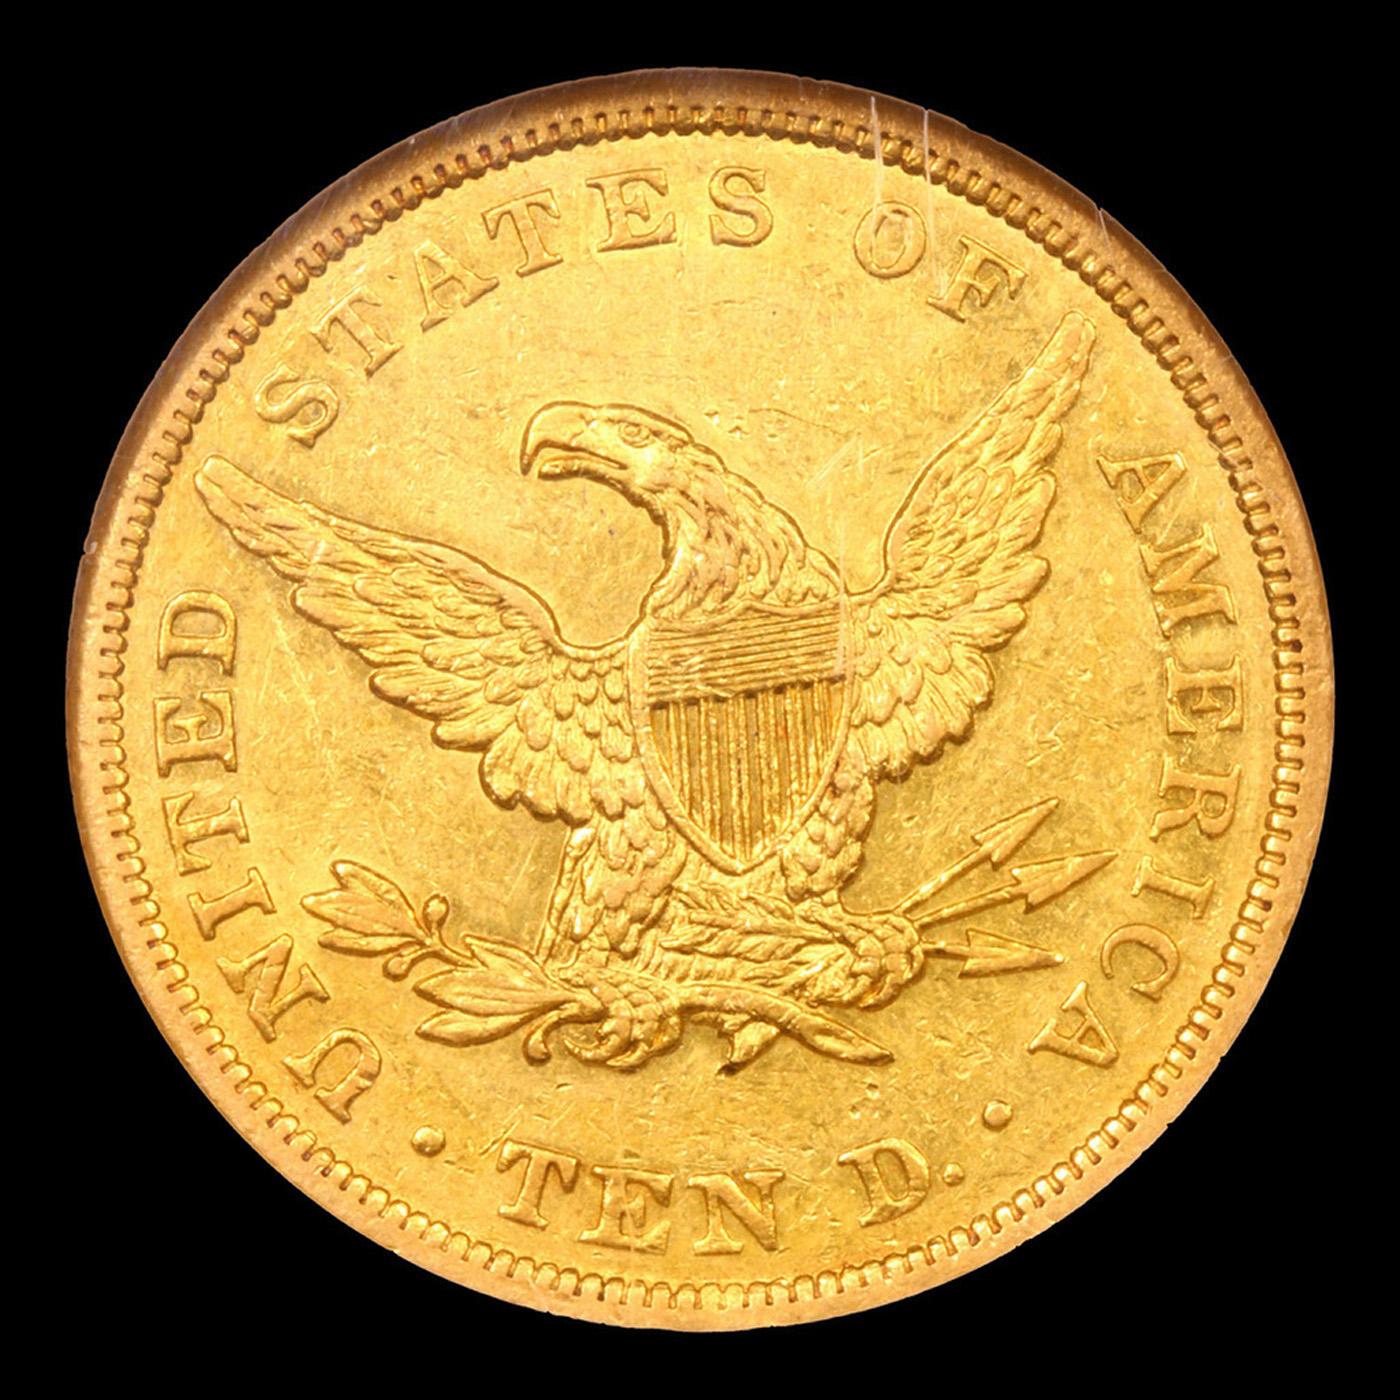 ***Auction Highlight*** 1839/8 Type of 38 Gold Liberty Eagle $10 Graded Select Unc BY USCG (fc)